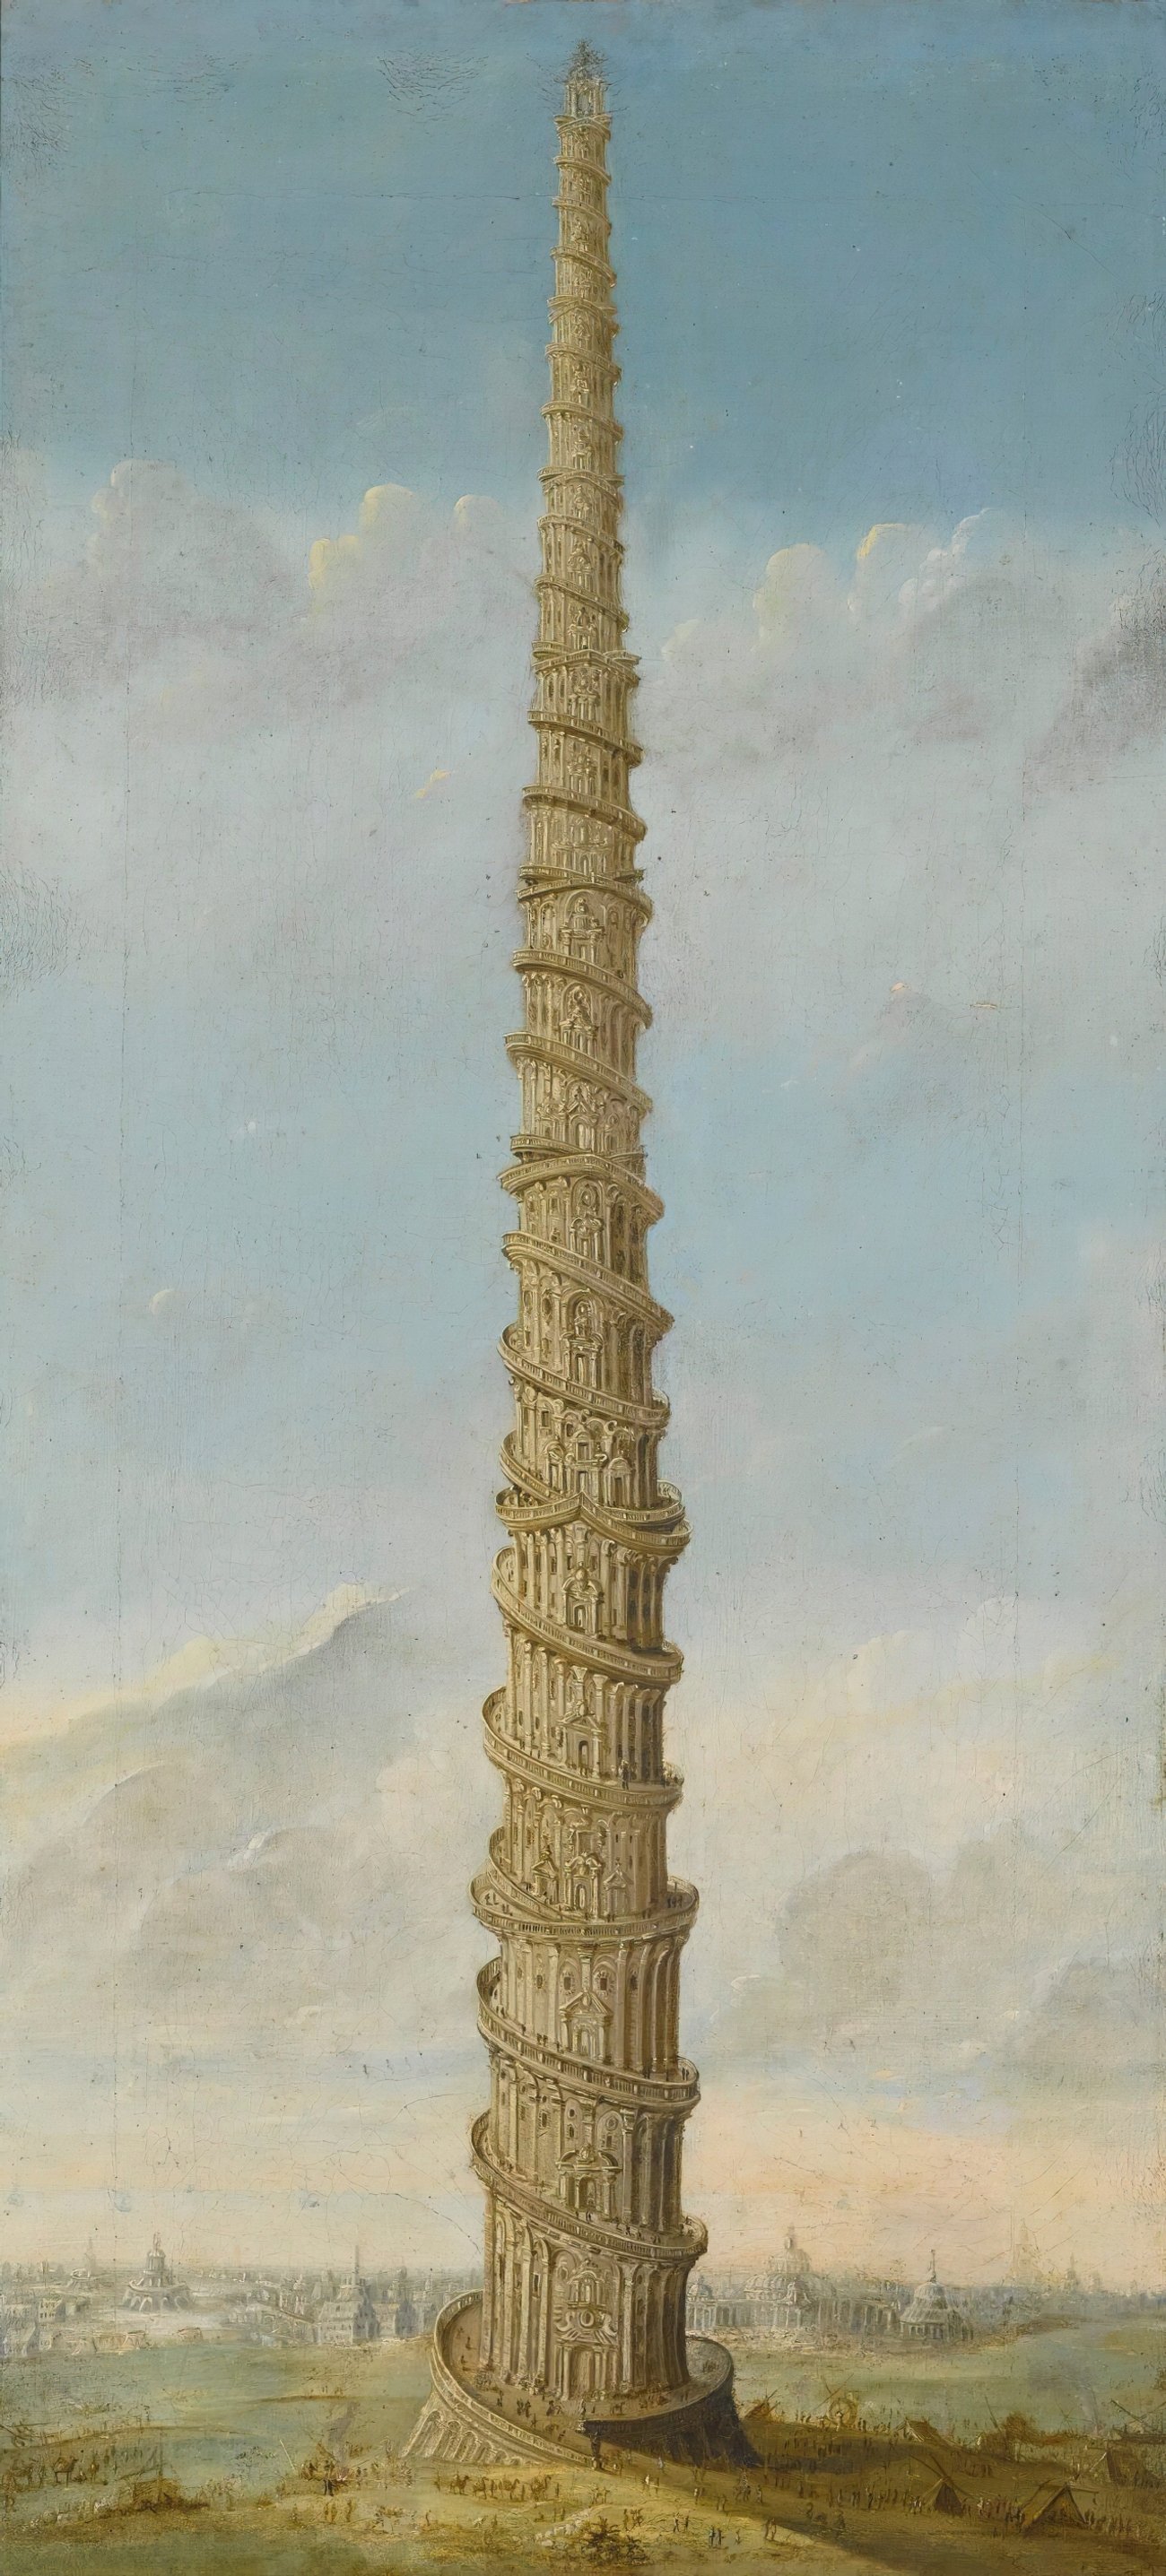 The Tower Of Babel (1776)